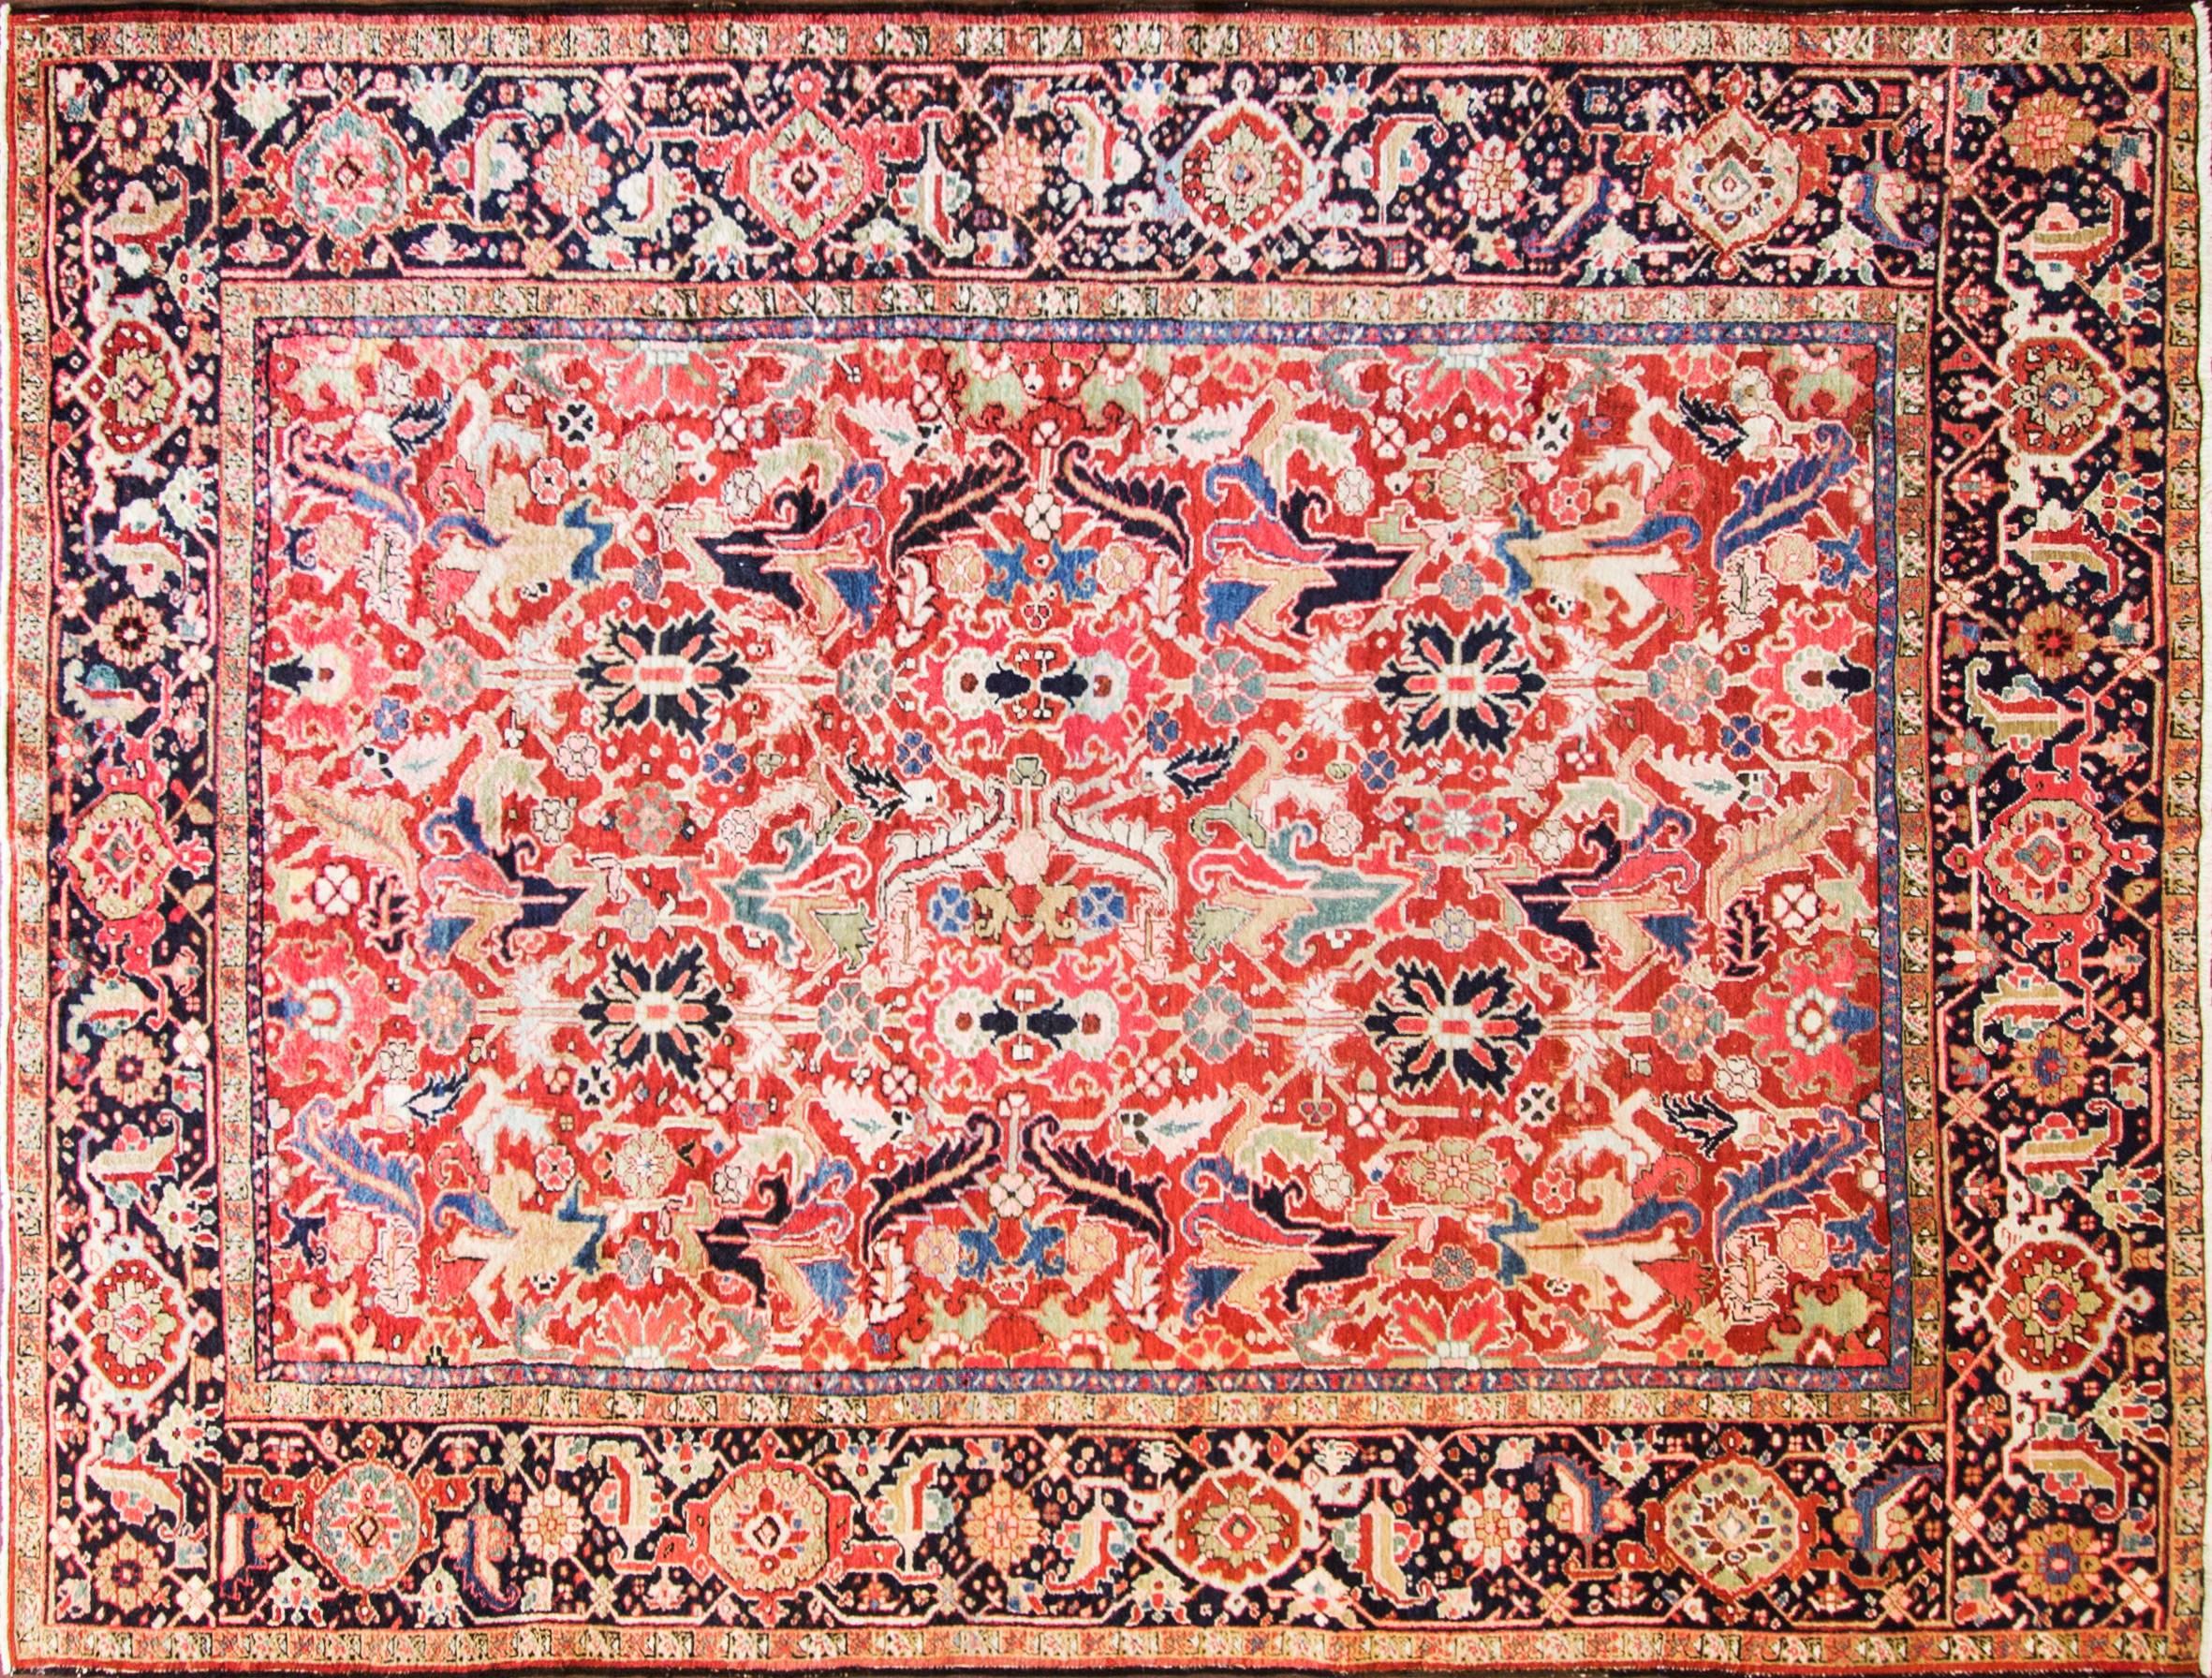 Gorgeous antique Persian Heriz carpet with all-over design and breathtaking red brick background color. Heriz rugs are Persian rugs from the area of Heris, East Azerbaijan in northwest Iran, northeast of Tabriz. Such rugs are produced in the village